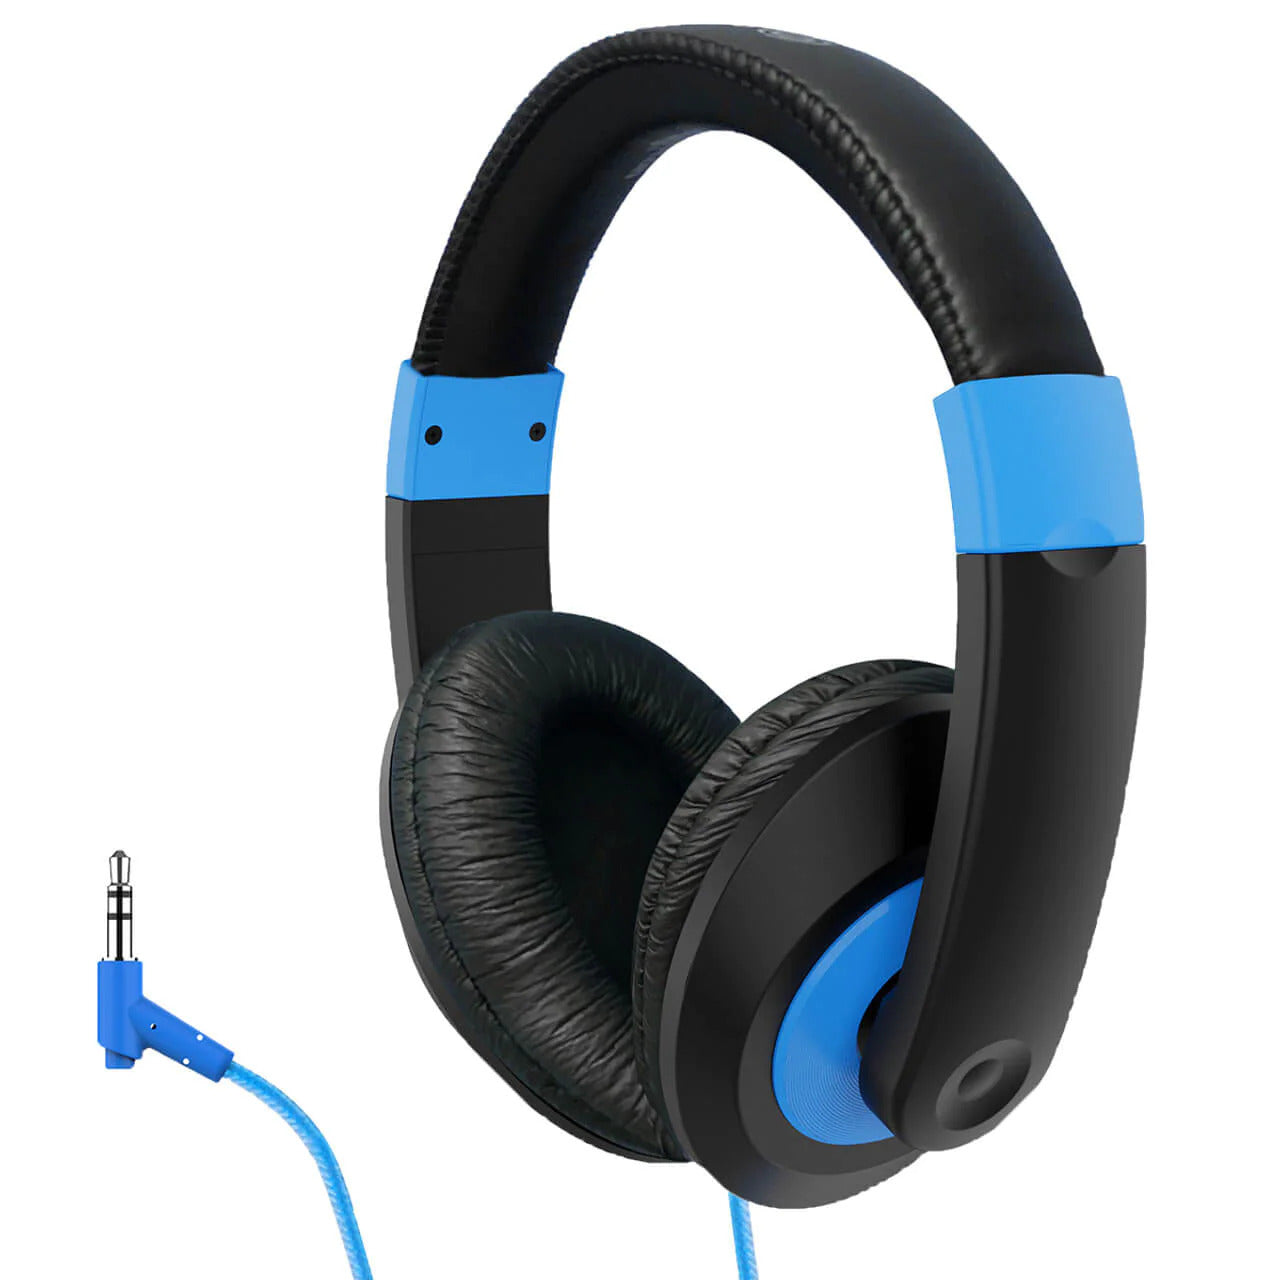 Learning Headphones is a US based company that sells 3.5 mm Stereo Headphones for School. Browse through our collections of the most recent and trending headphones in the market, at an affordable price.